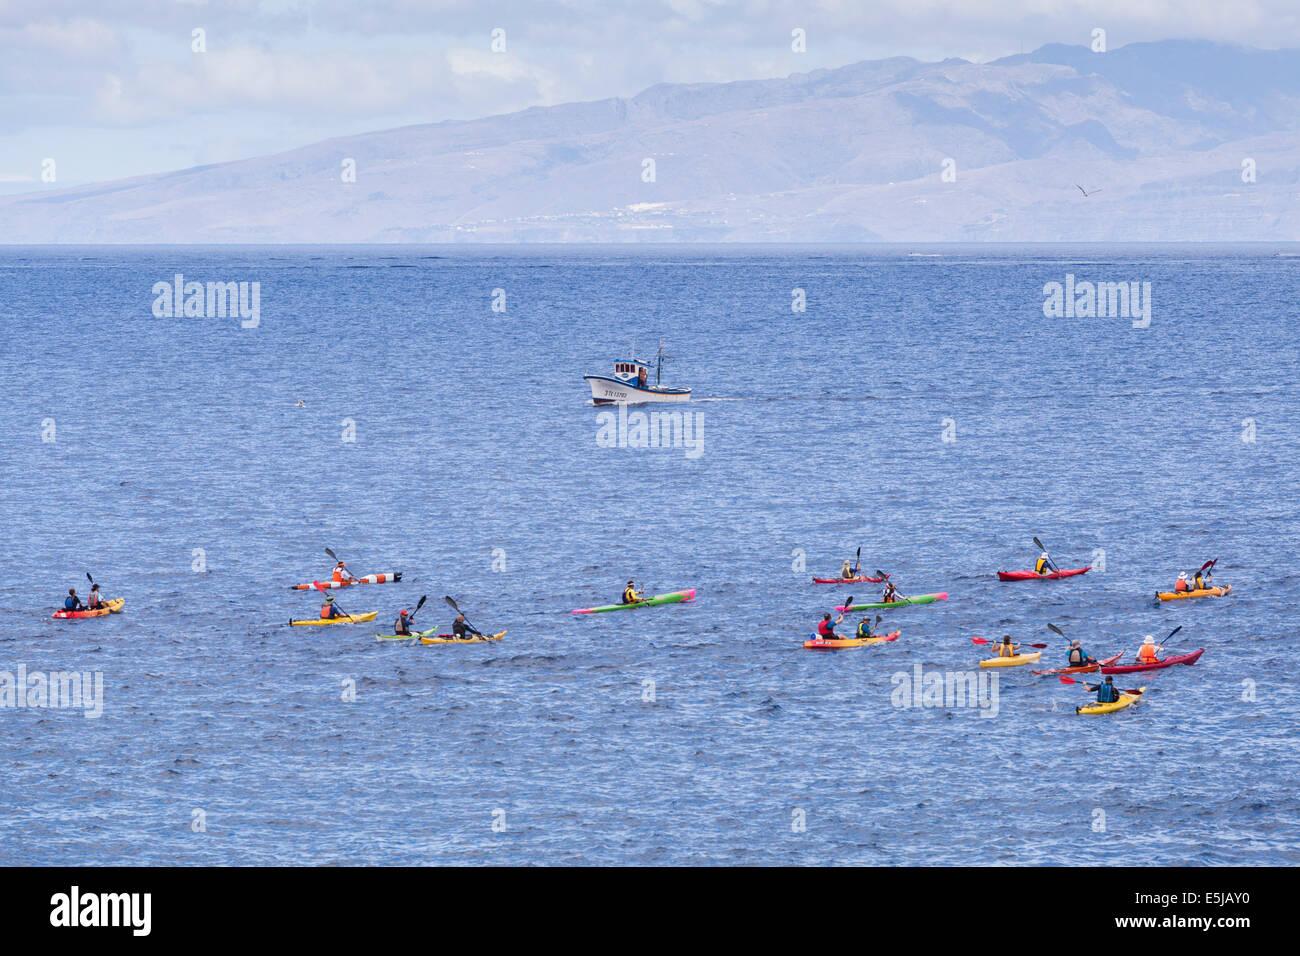 Tenerife, Canary Islands, Spain. 2nd Aug, 2014. Myriam Guillot and Jacky Boisset. World champion adventure racers take part in the 4th annual kayak race from Playa San Juan, to Los Gigantes and back. The race is an event in the programme of the village's annual fiesta in honor of San Juan Bautista and Nuestra Senora del Carmen. Tenerife, Canary Islands, Spain. Credit:  Phil Crean A/Alamy Live News Stock Photo